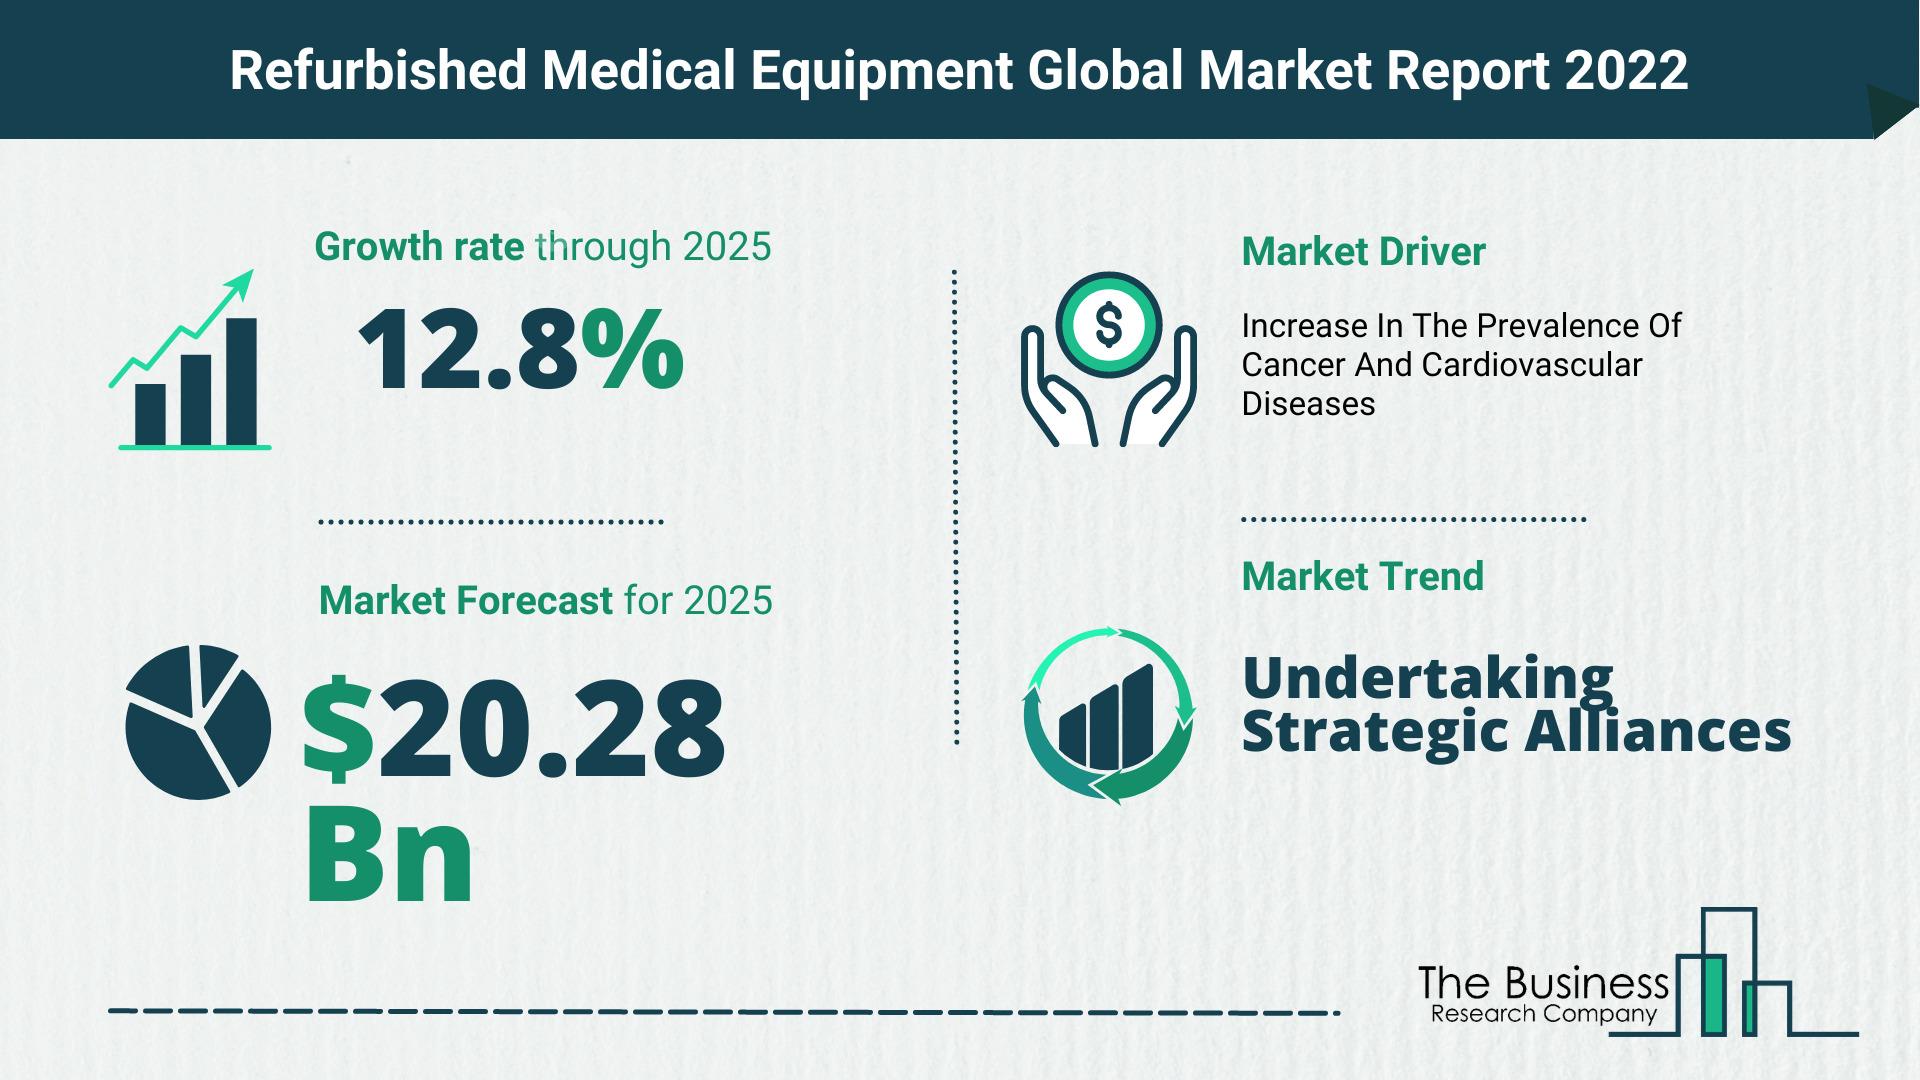 How Will The Refurbished Medical Equipment Market Grow In 2022?